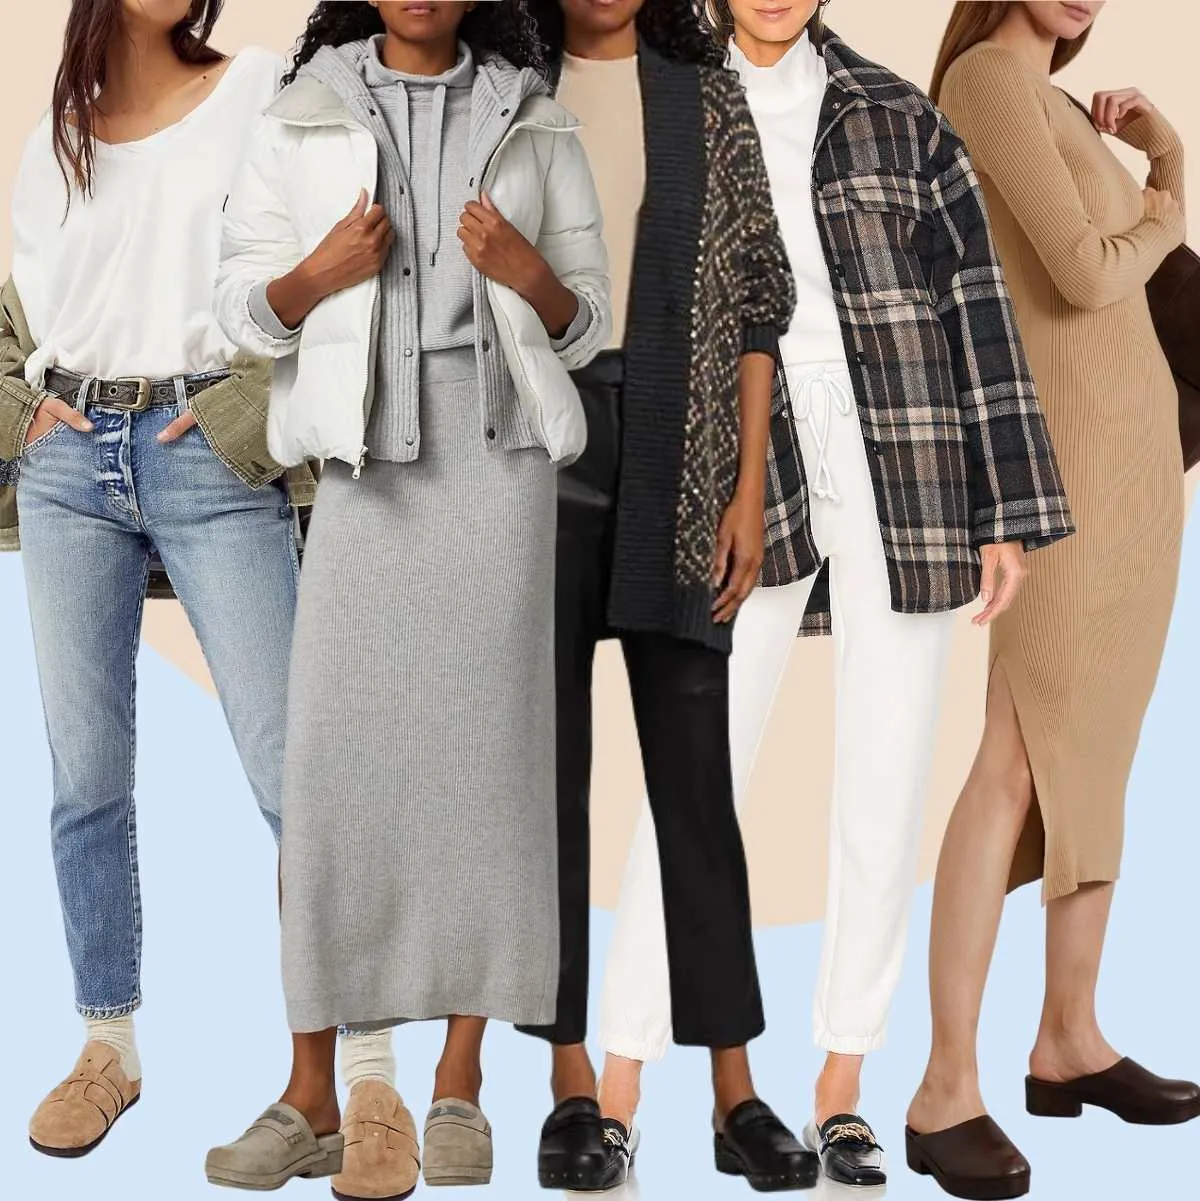 Collage of 5 women wearing different winter outfits with mules.